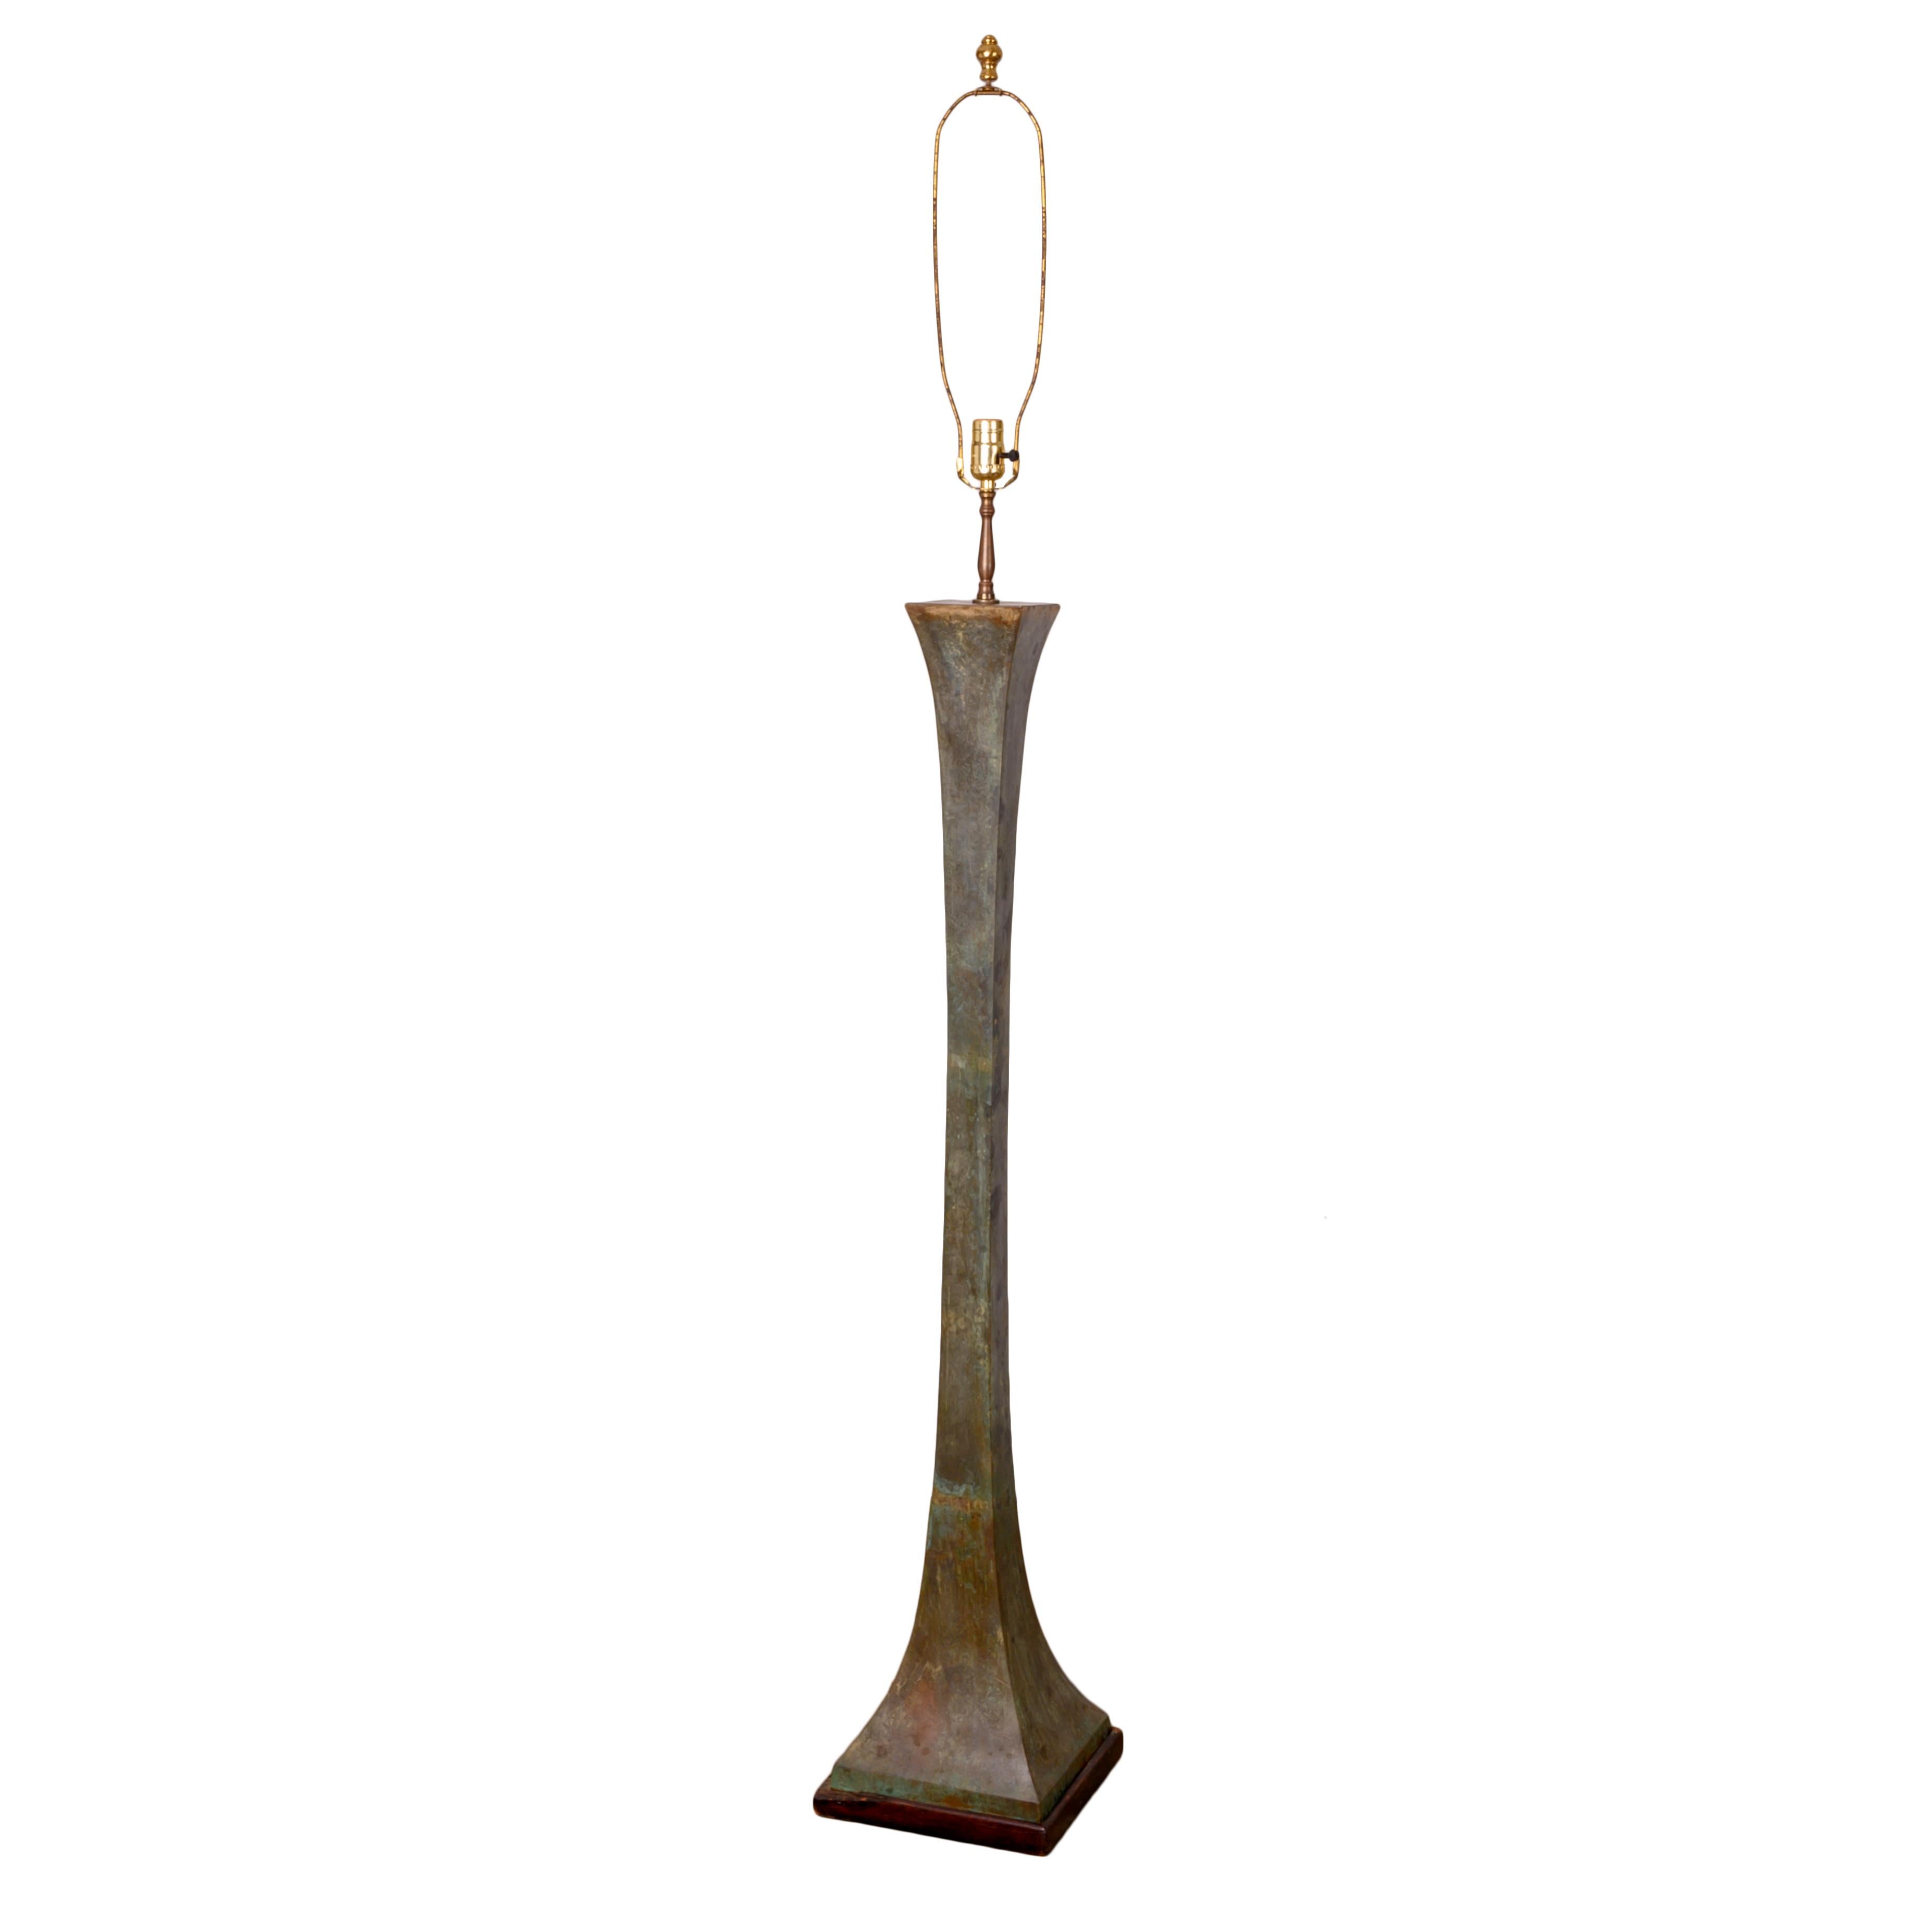 A verdigris bronze floor lamp by Stewart Ross James for Hansen, c.1960s.

10 inches wide and deep by 48 ½ inches tall to top of bronze; 70 inches height to finial.

